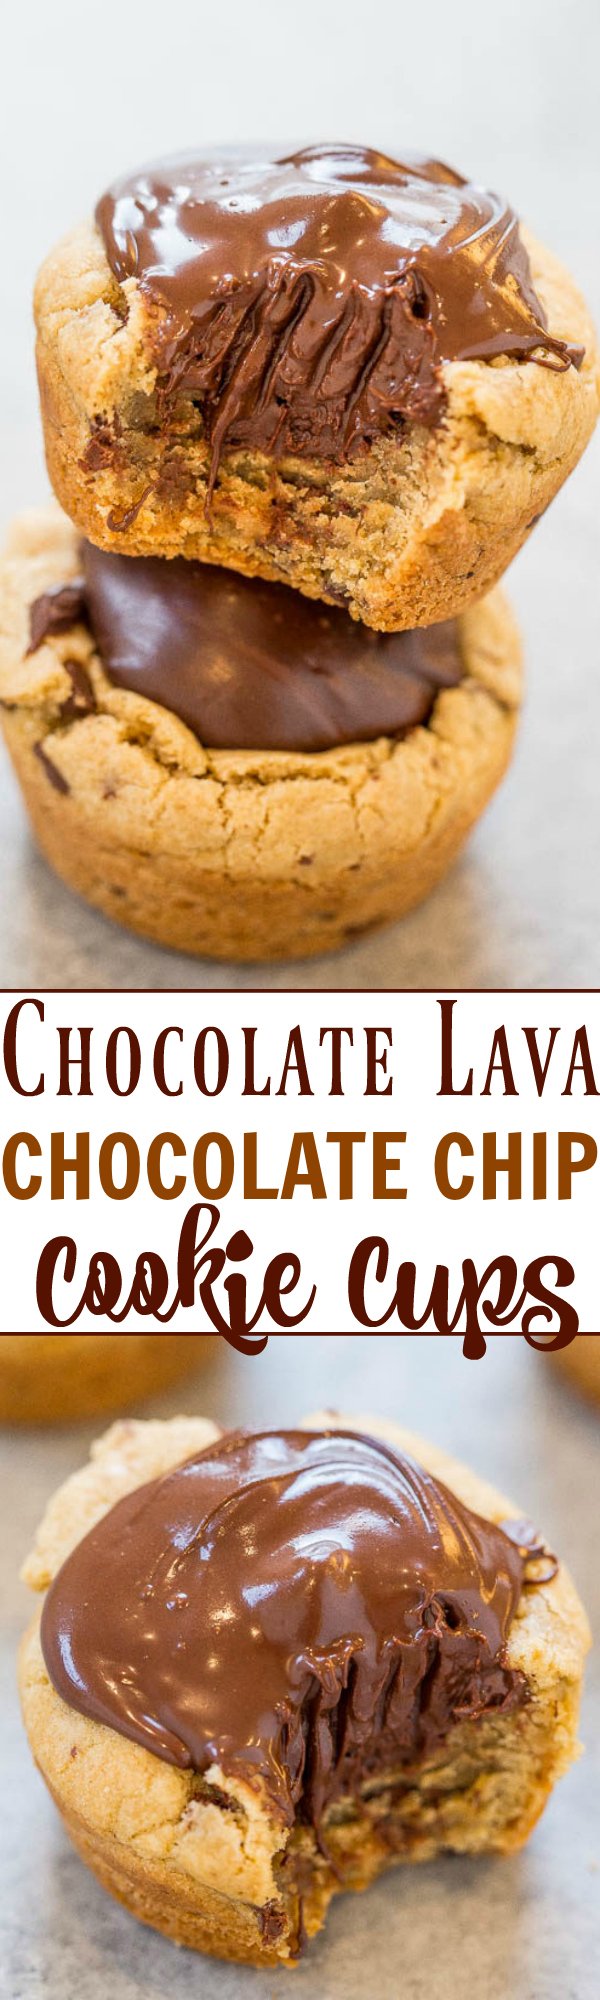 Two picture collage of Chocolate Lava Chocolate Chip Cookie Cups with graphic title